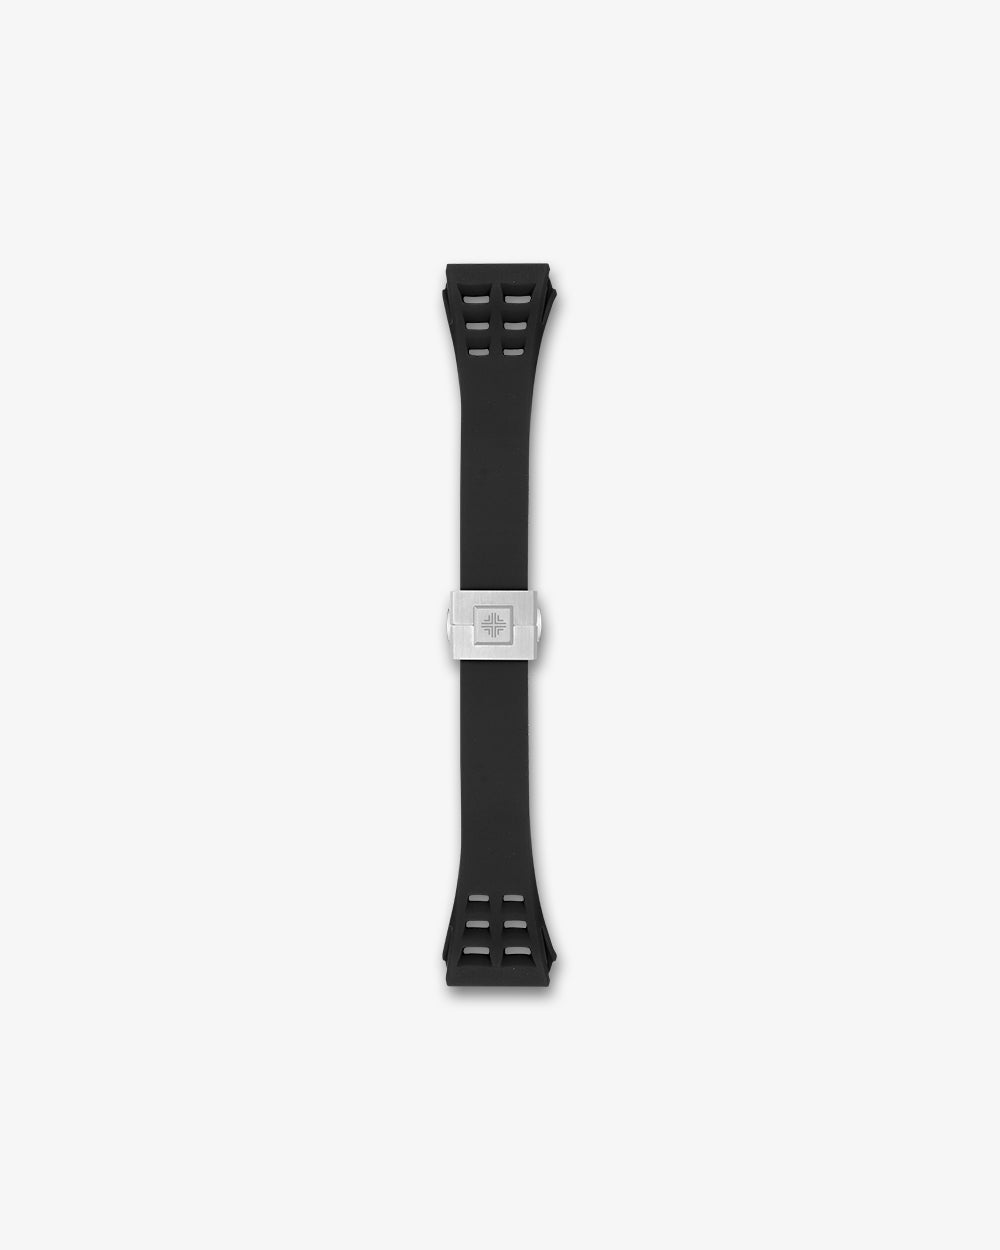 Swiss Concept Racing Elite Edition Strap (Onyx Black & Stainless Steel)